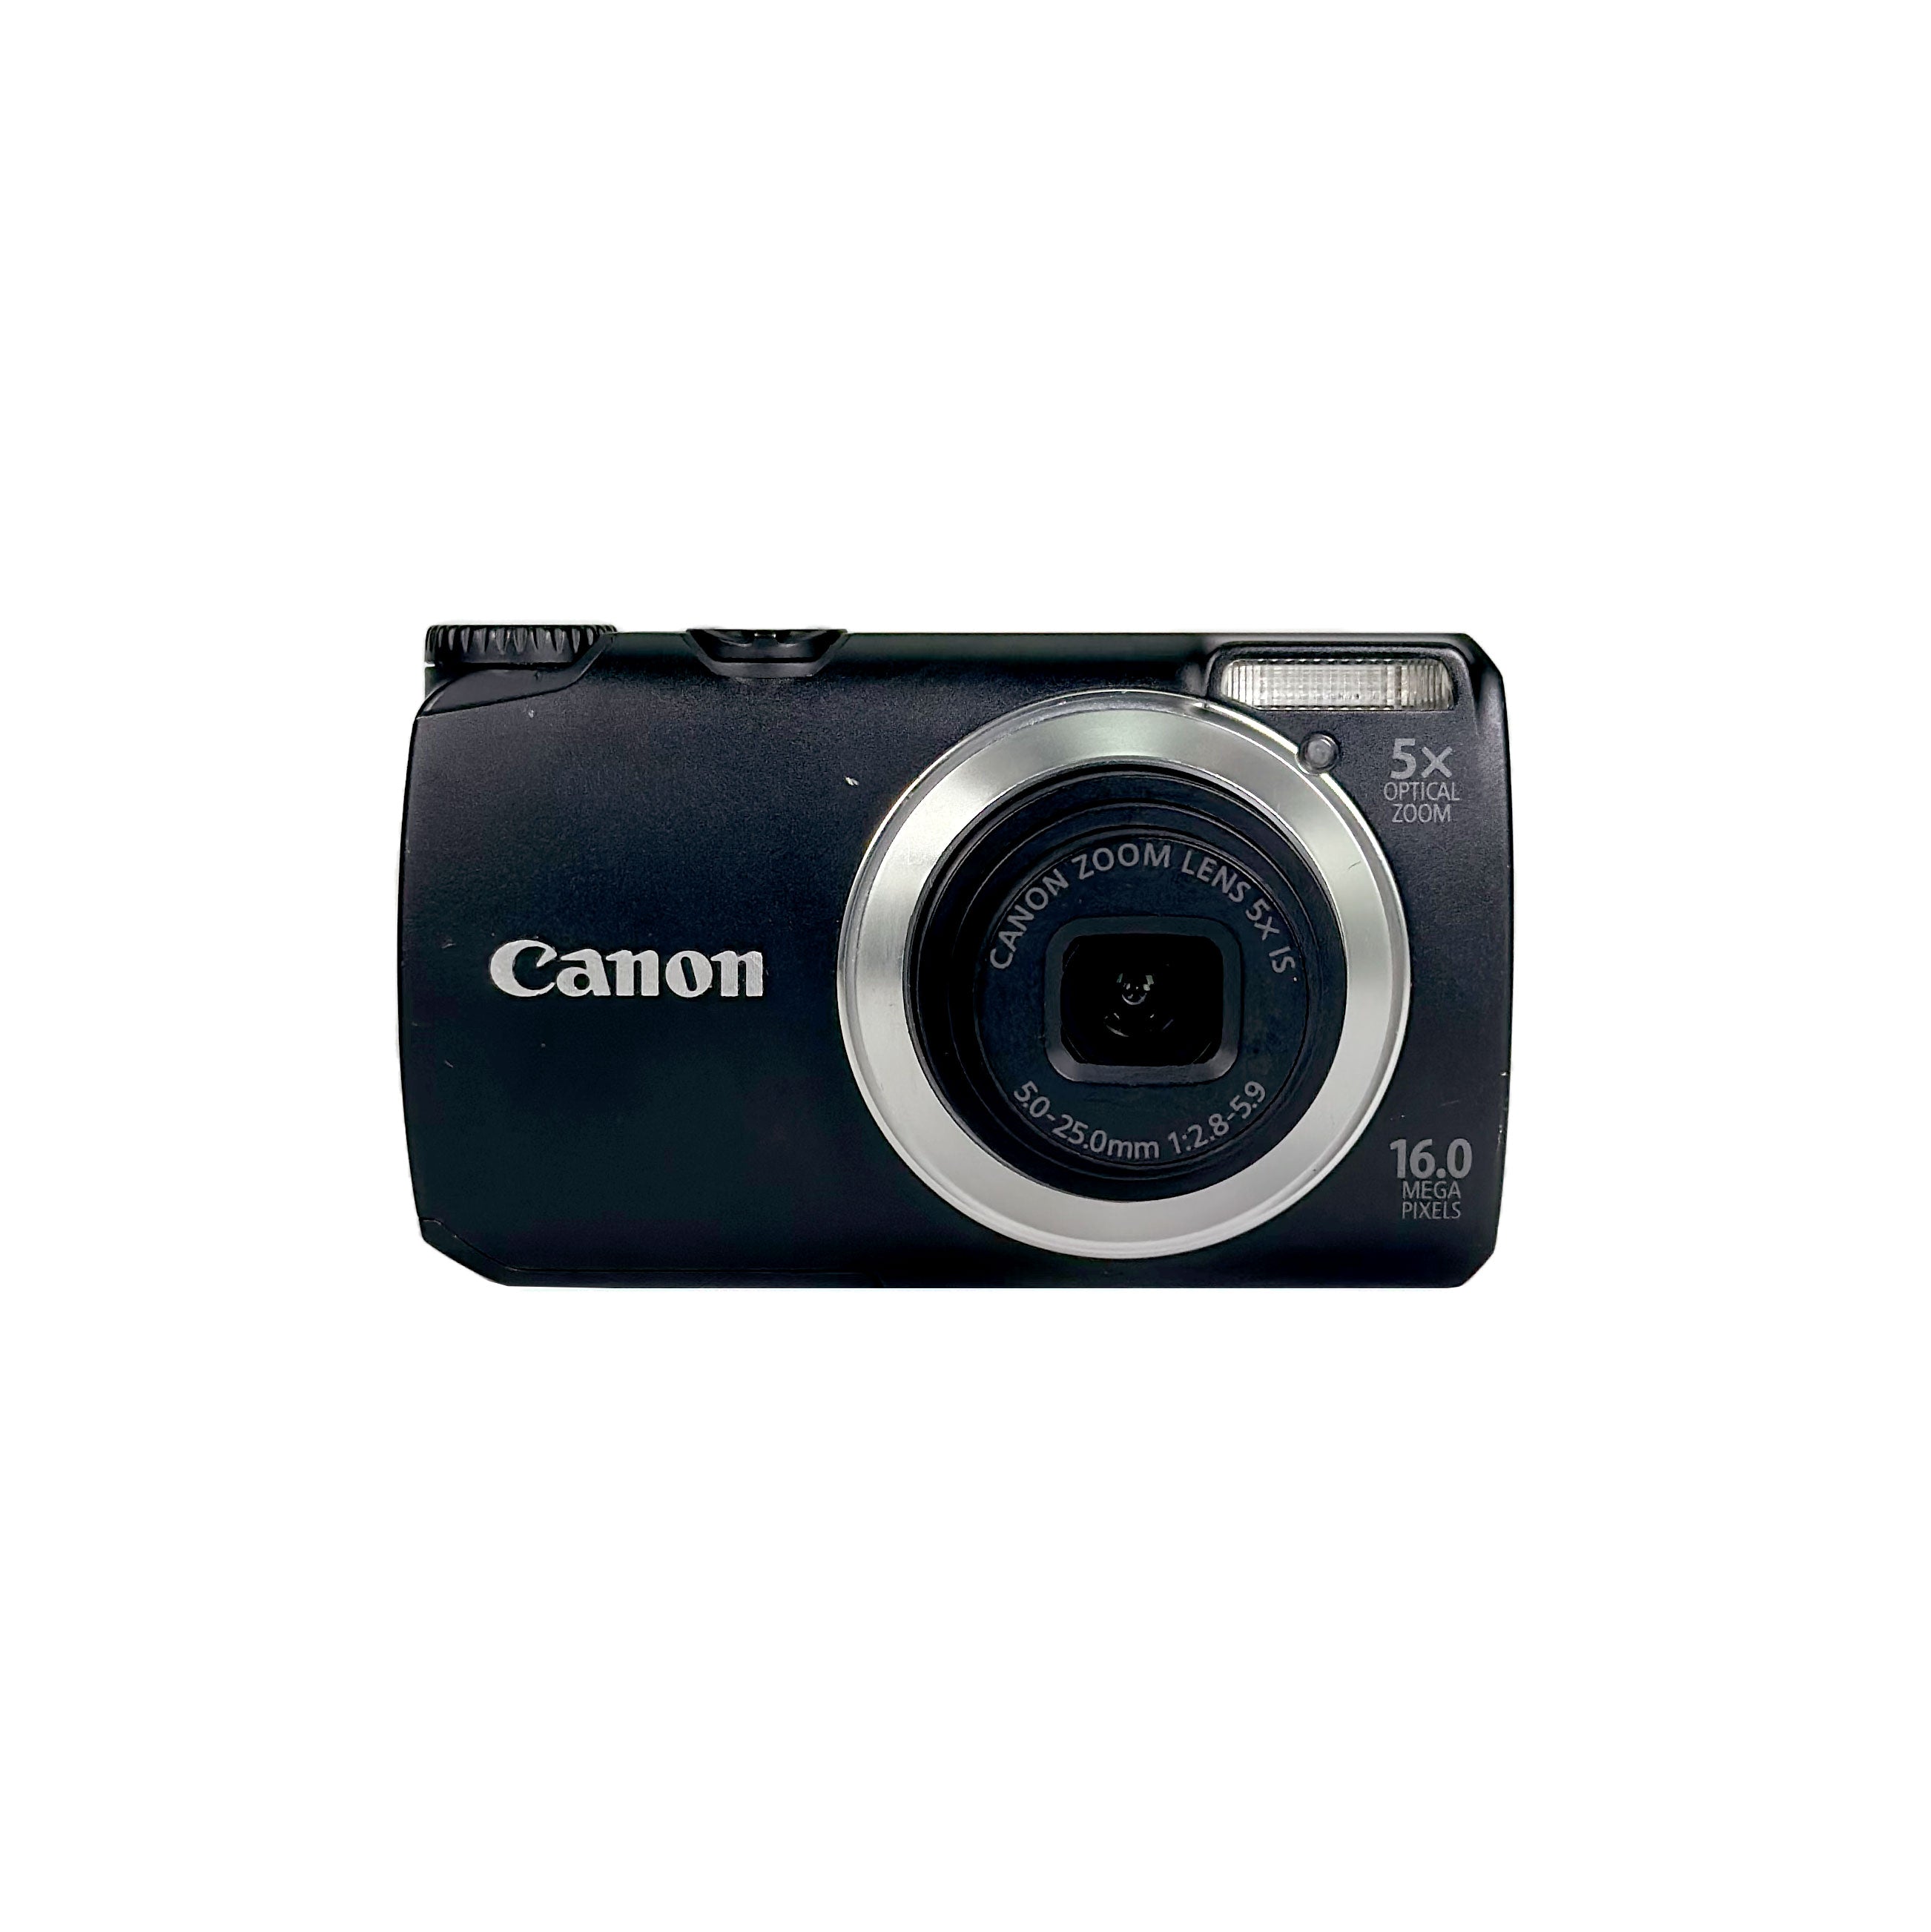 Canon Powershot A3300 IS Digital Compact